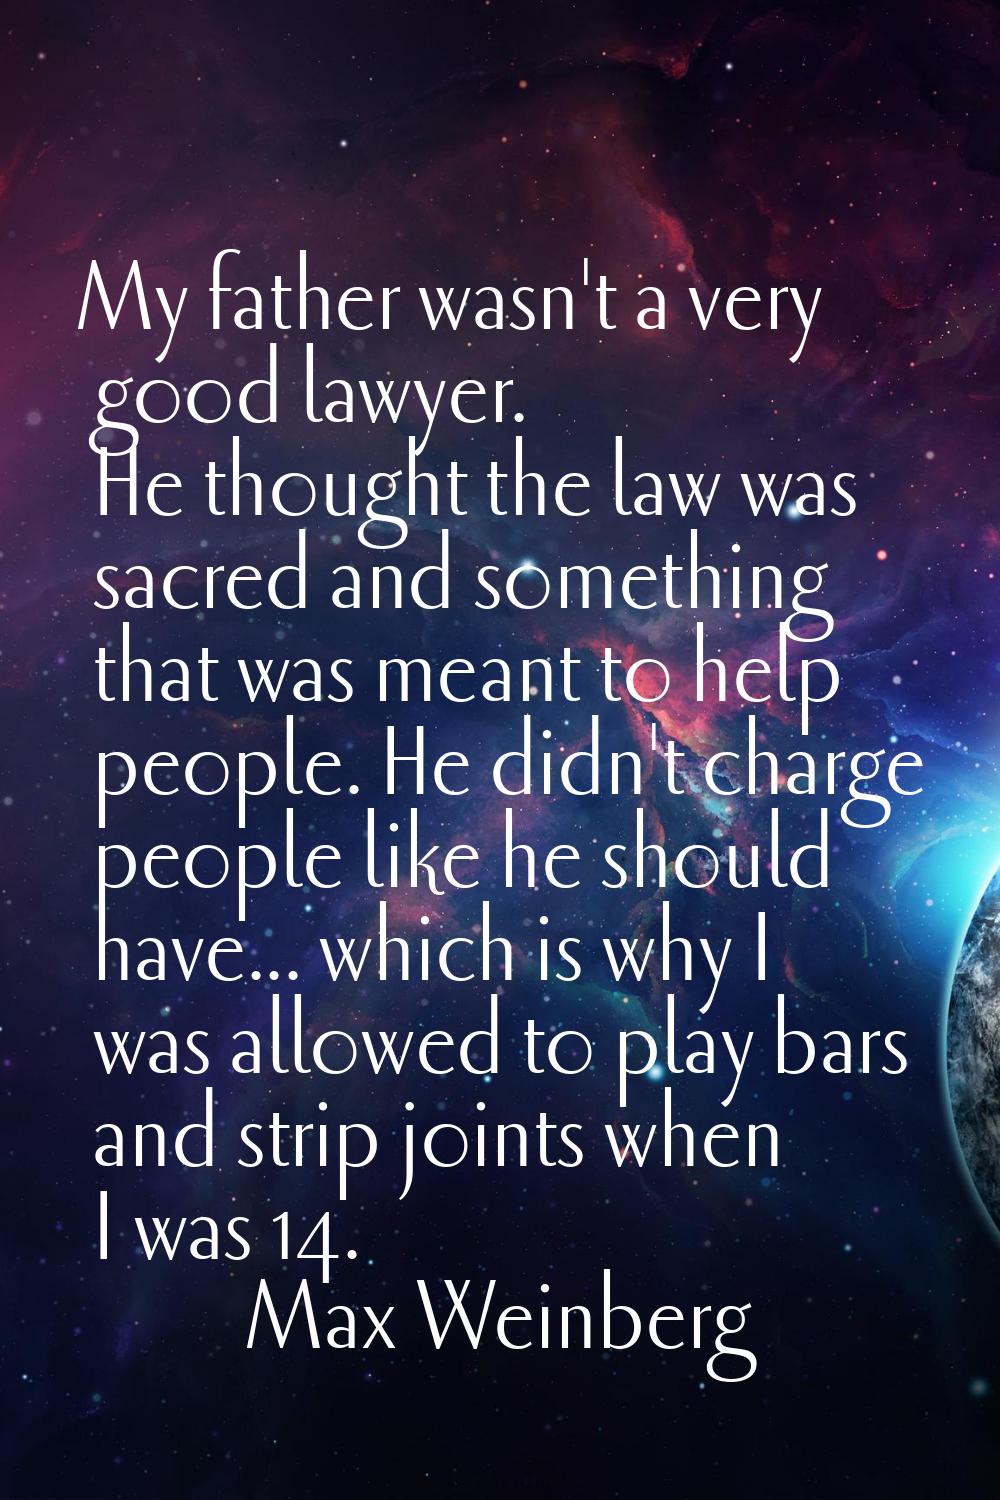 My father wasn't a very good lawyer. He thought the law was sacred and something that was meant to 